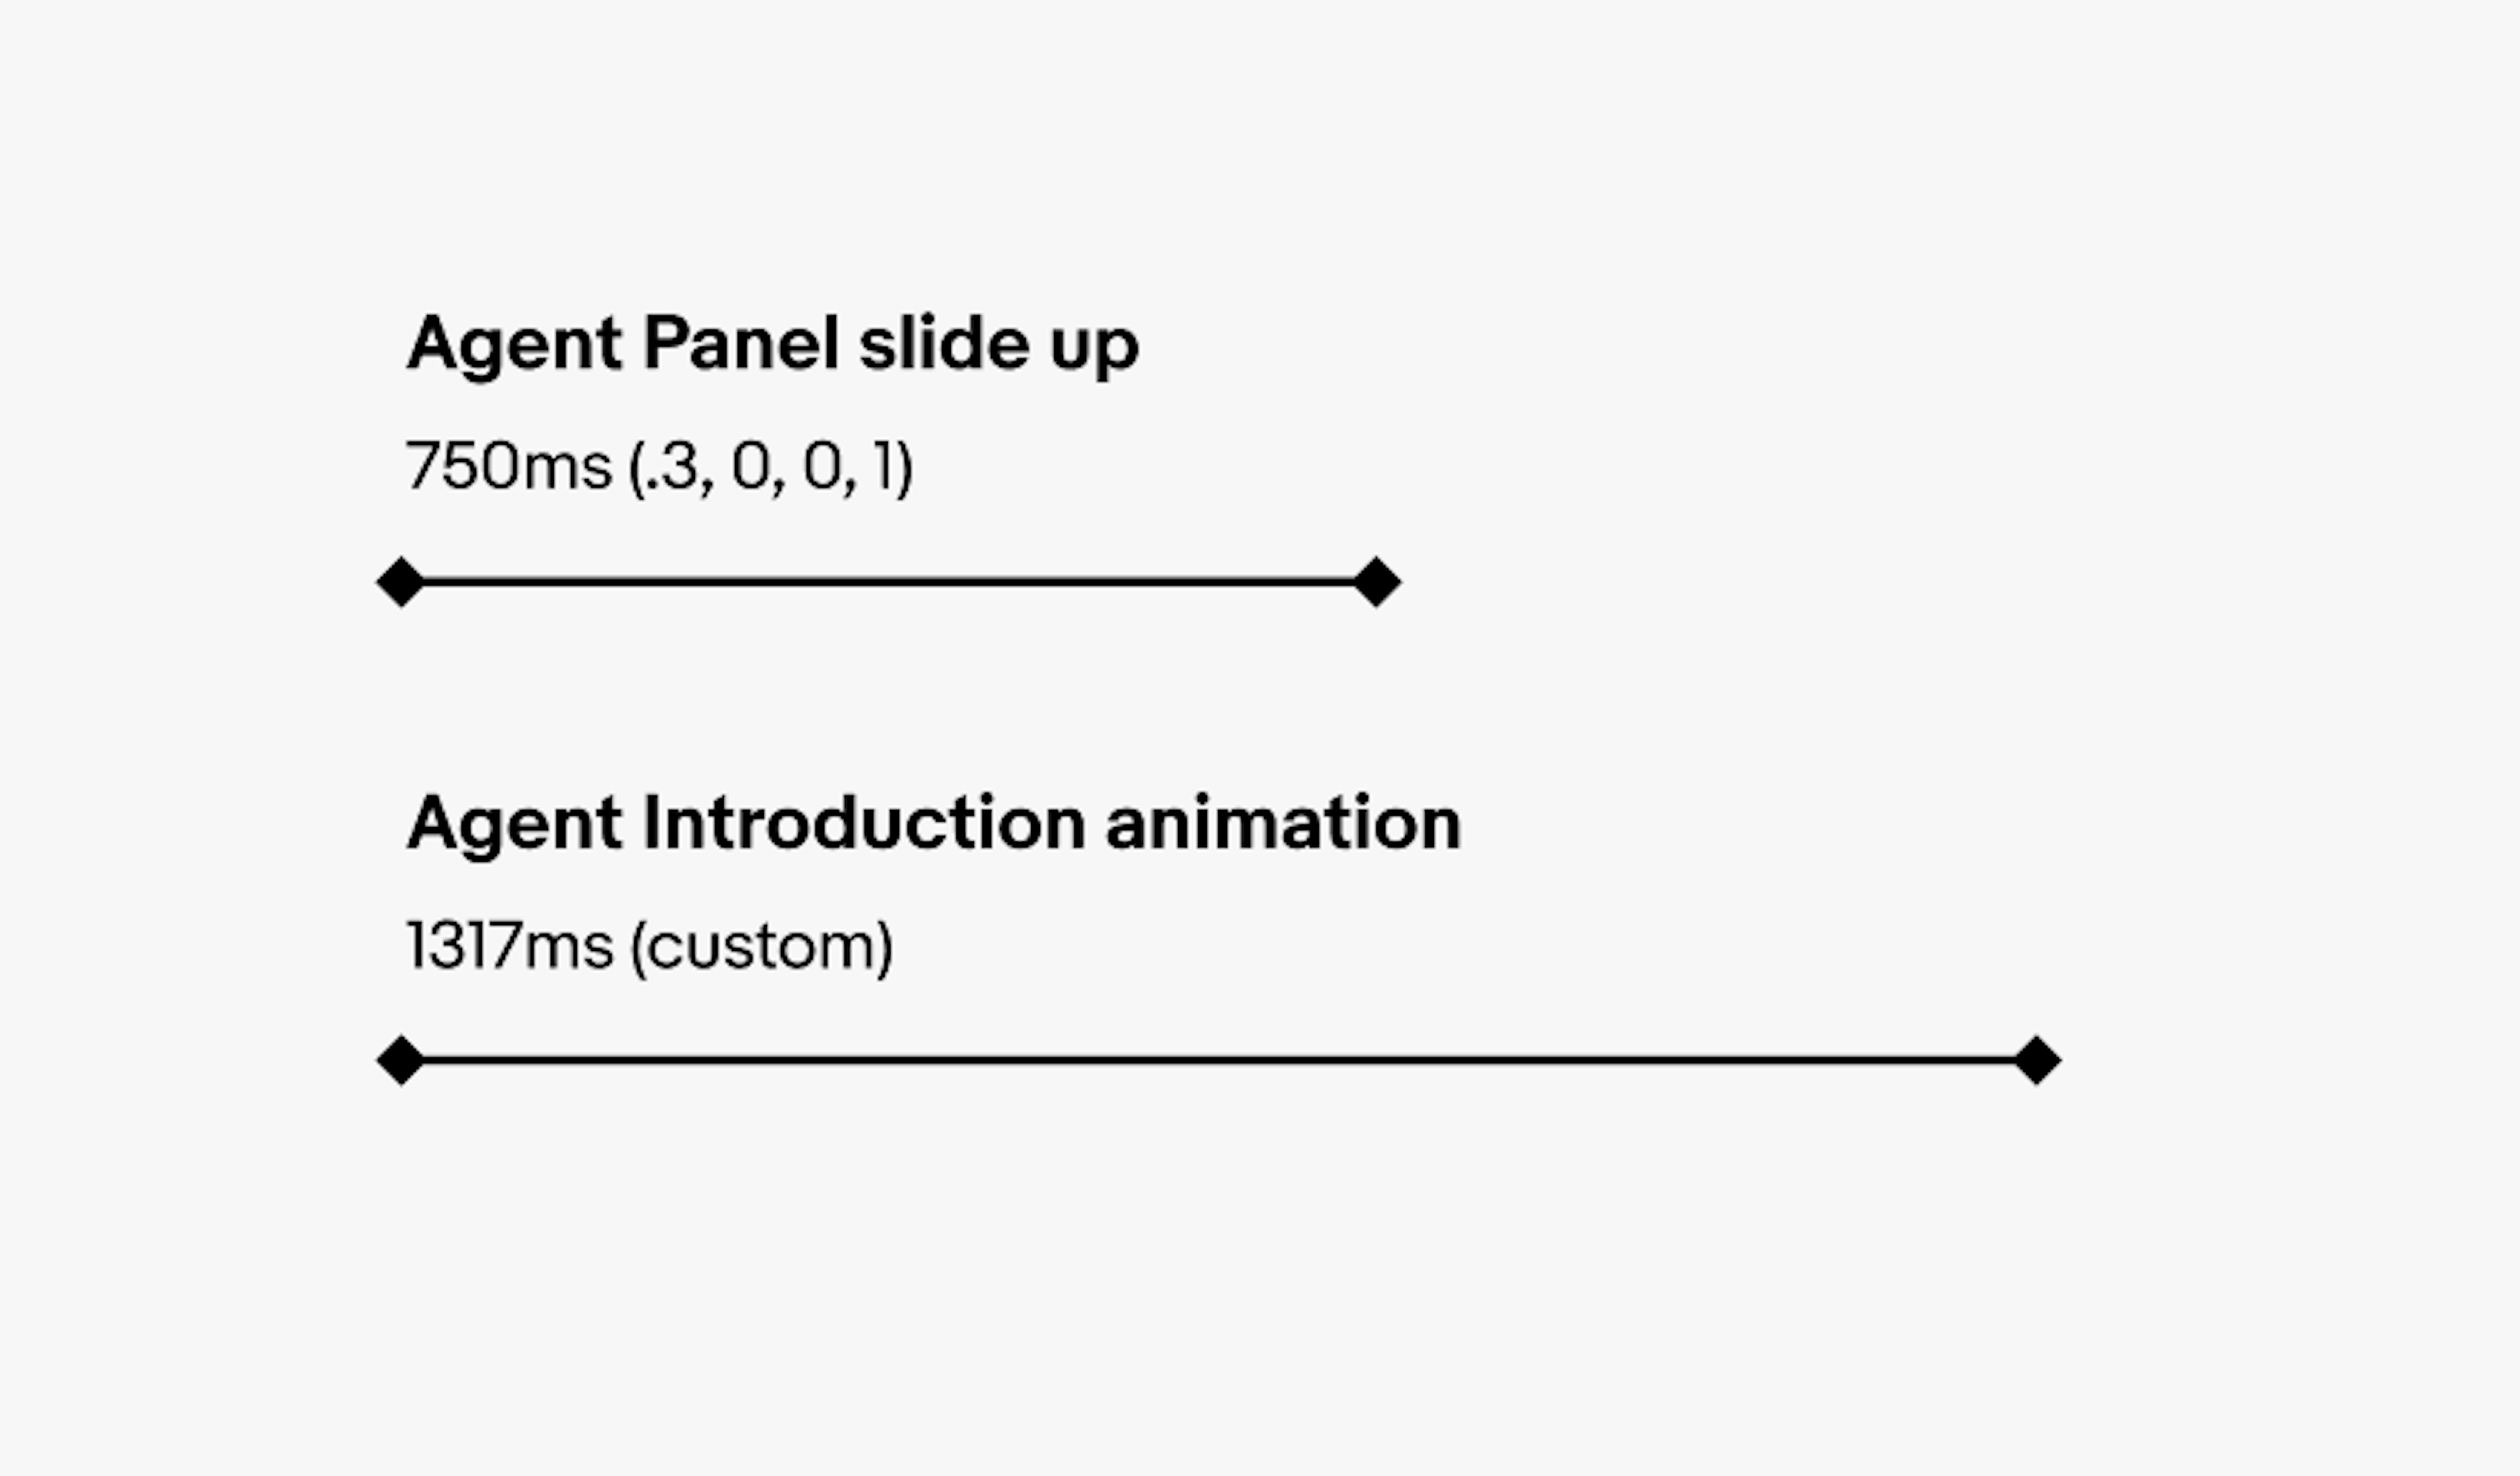 Two motion timeline graphics. The first is for agent panel slide up 750ms (.3, 0, 0, 1). The second is for agent introduction animation 1317ms (custom).